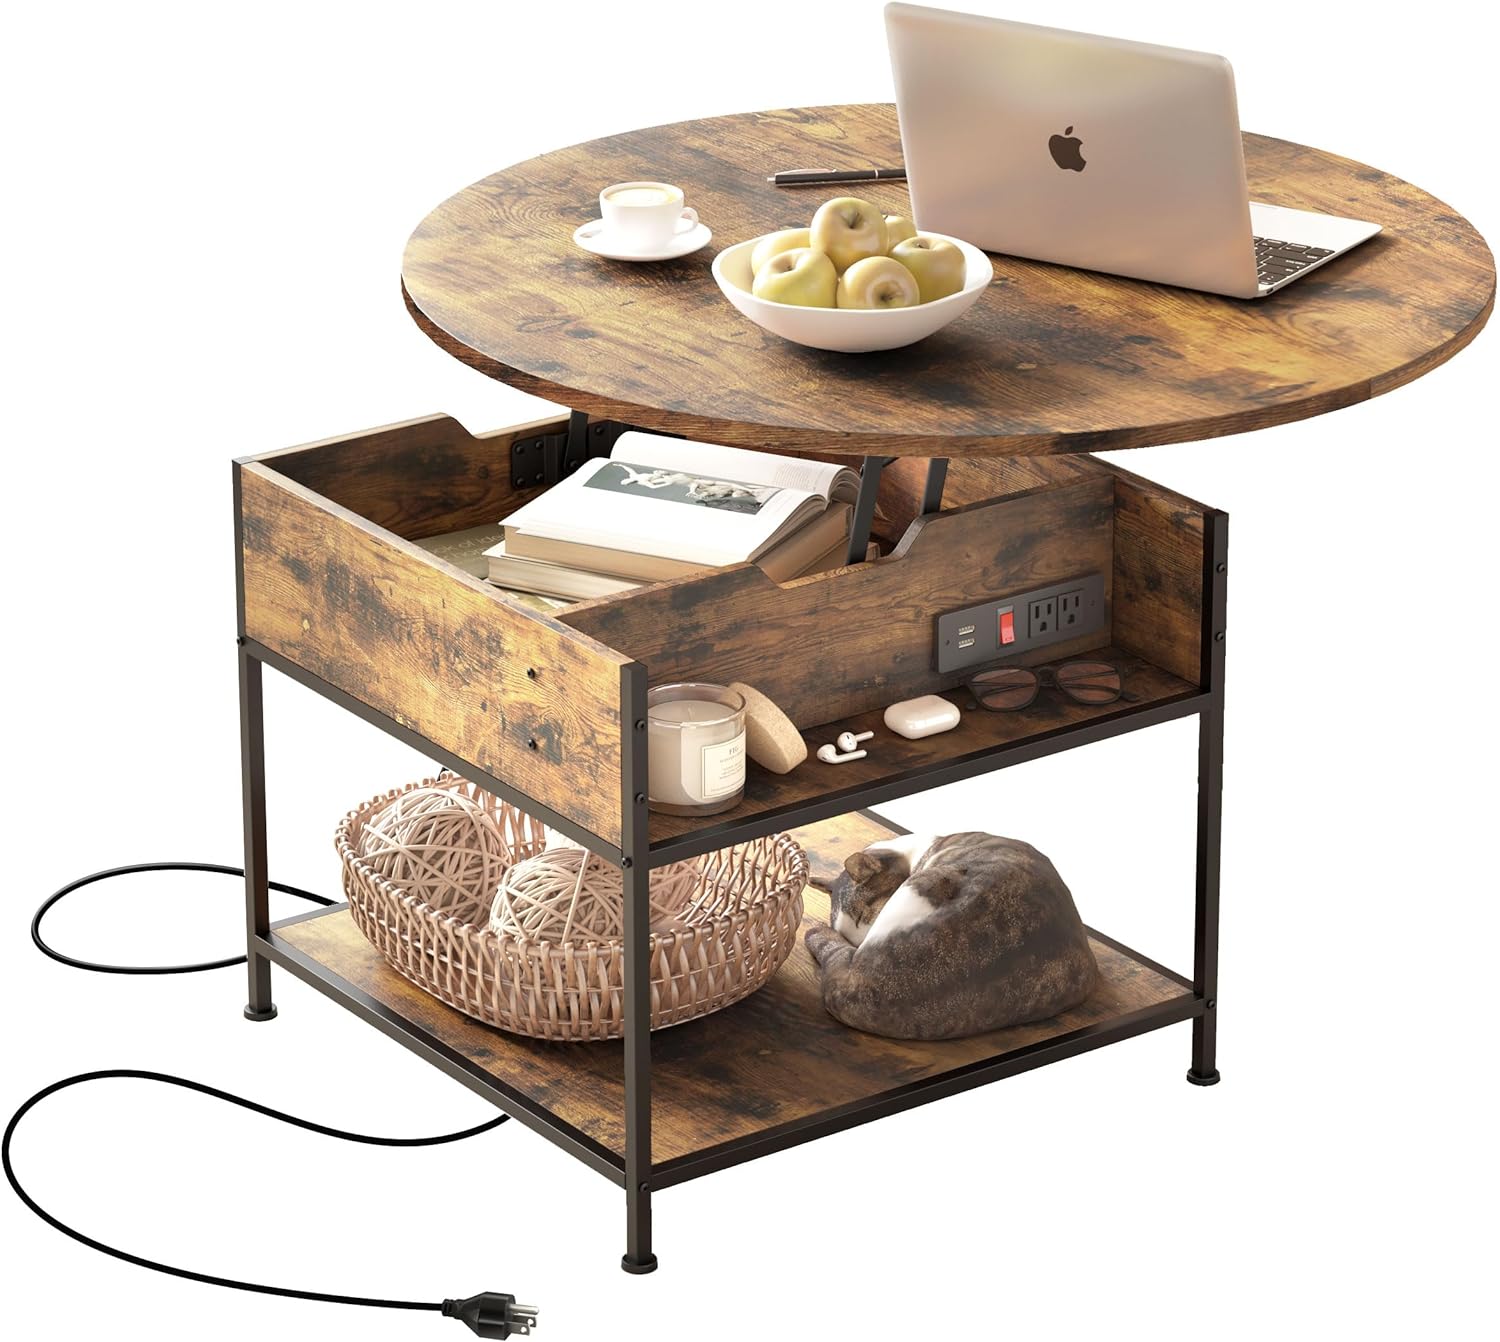 Modern Round Lift Top Coffee Table with Storage, Stylish Living Room Tables, Round Coffee Tables for Living Room, AC and USB Outlets (Rustic Brown)